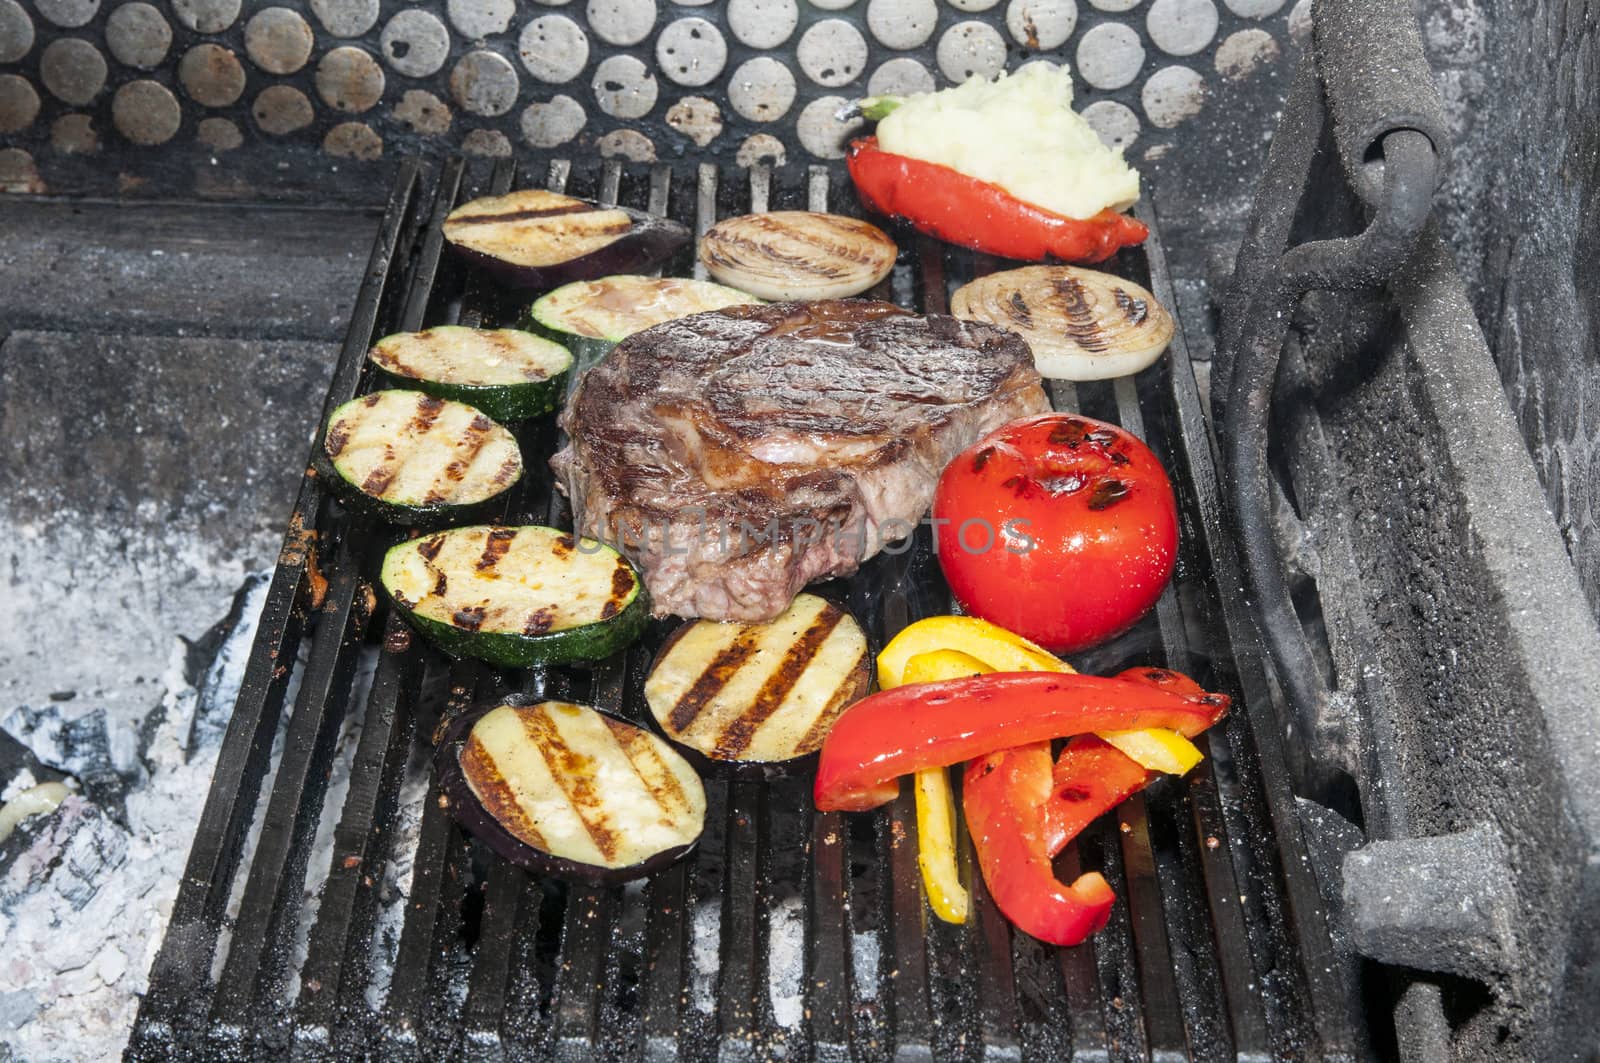 cooking steak and vegetables on the grill